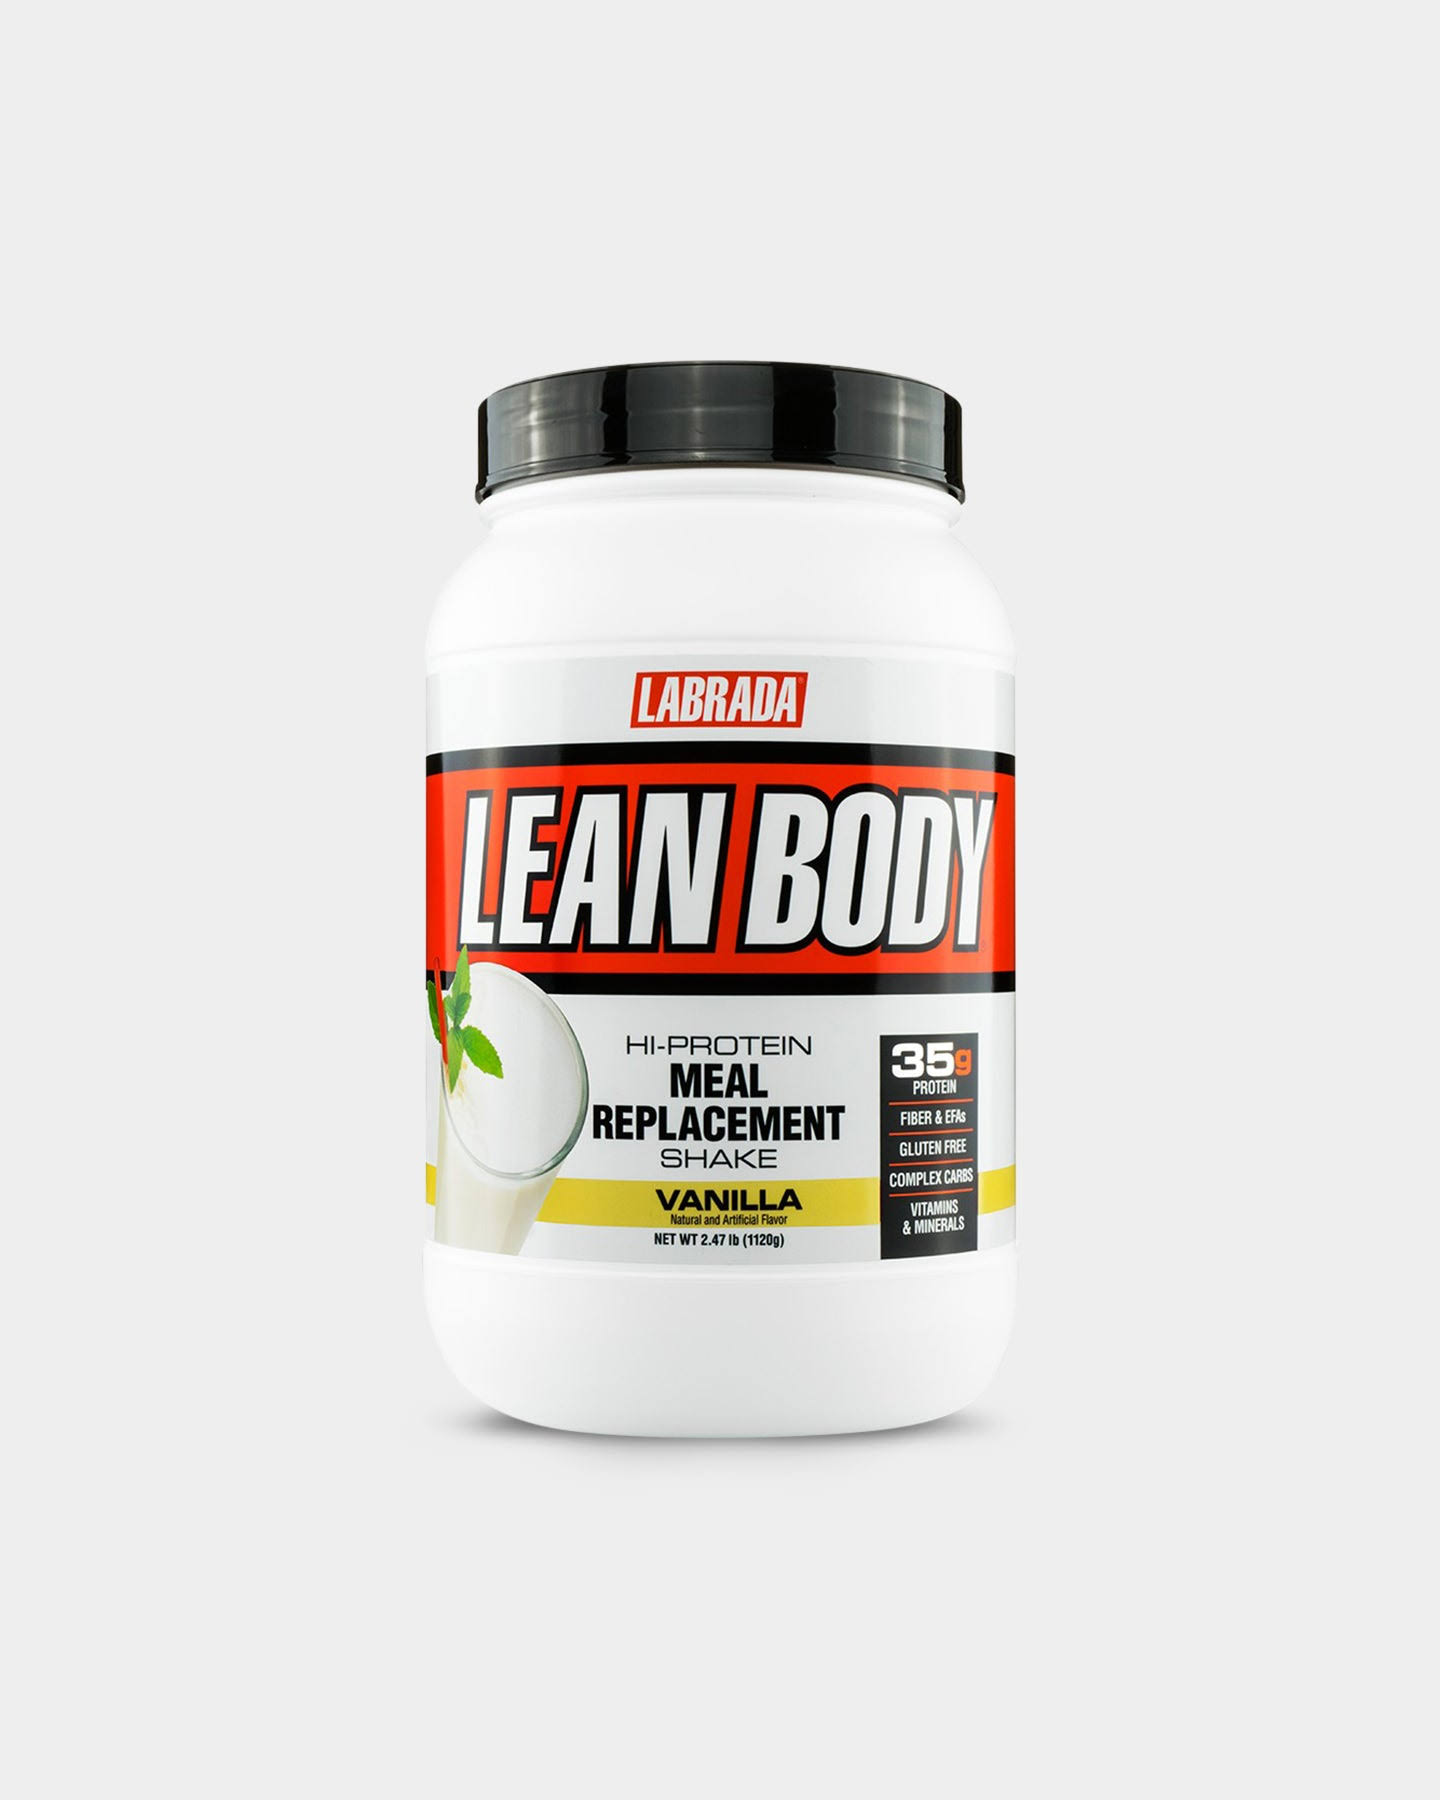 Labrada Nutrition Lean Body Hi-Protein Meal Replacement Shake - Vanilla, 2.47 lbs